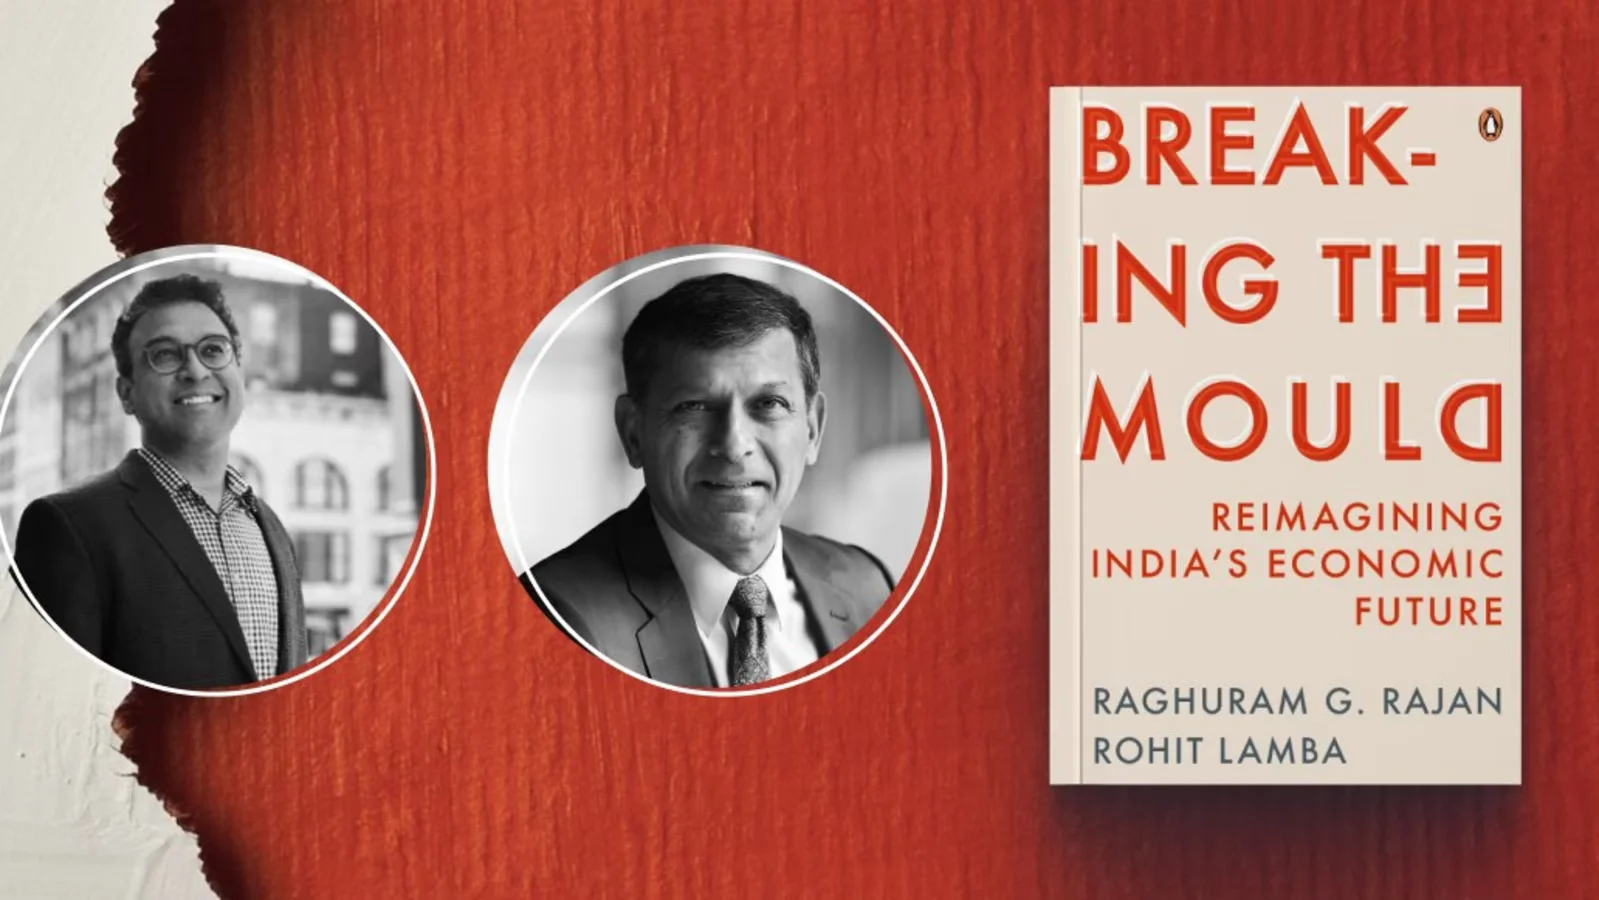 Raghuram Rajan's new book "Breaking the Mould: Reimagining India's Economic Future" launched